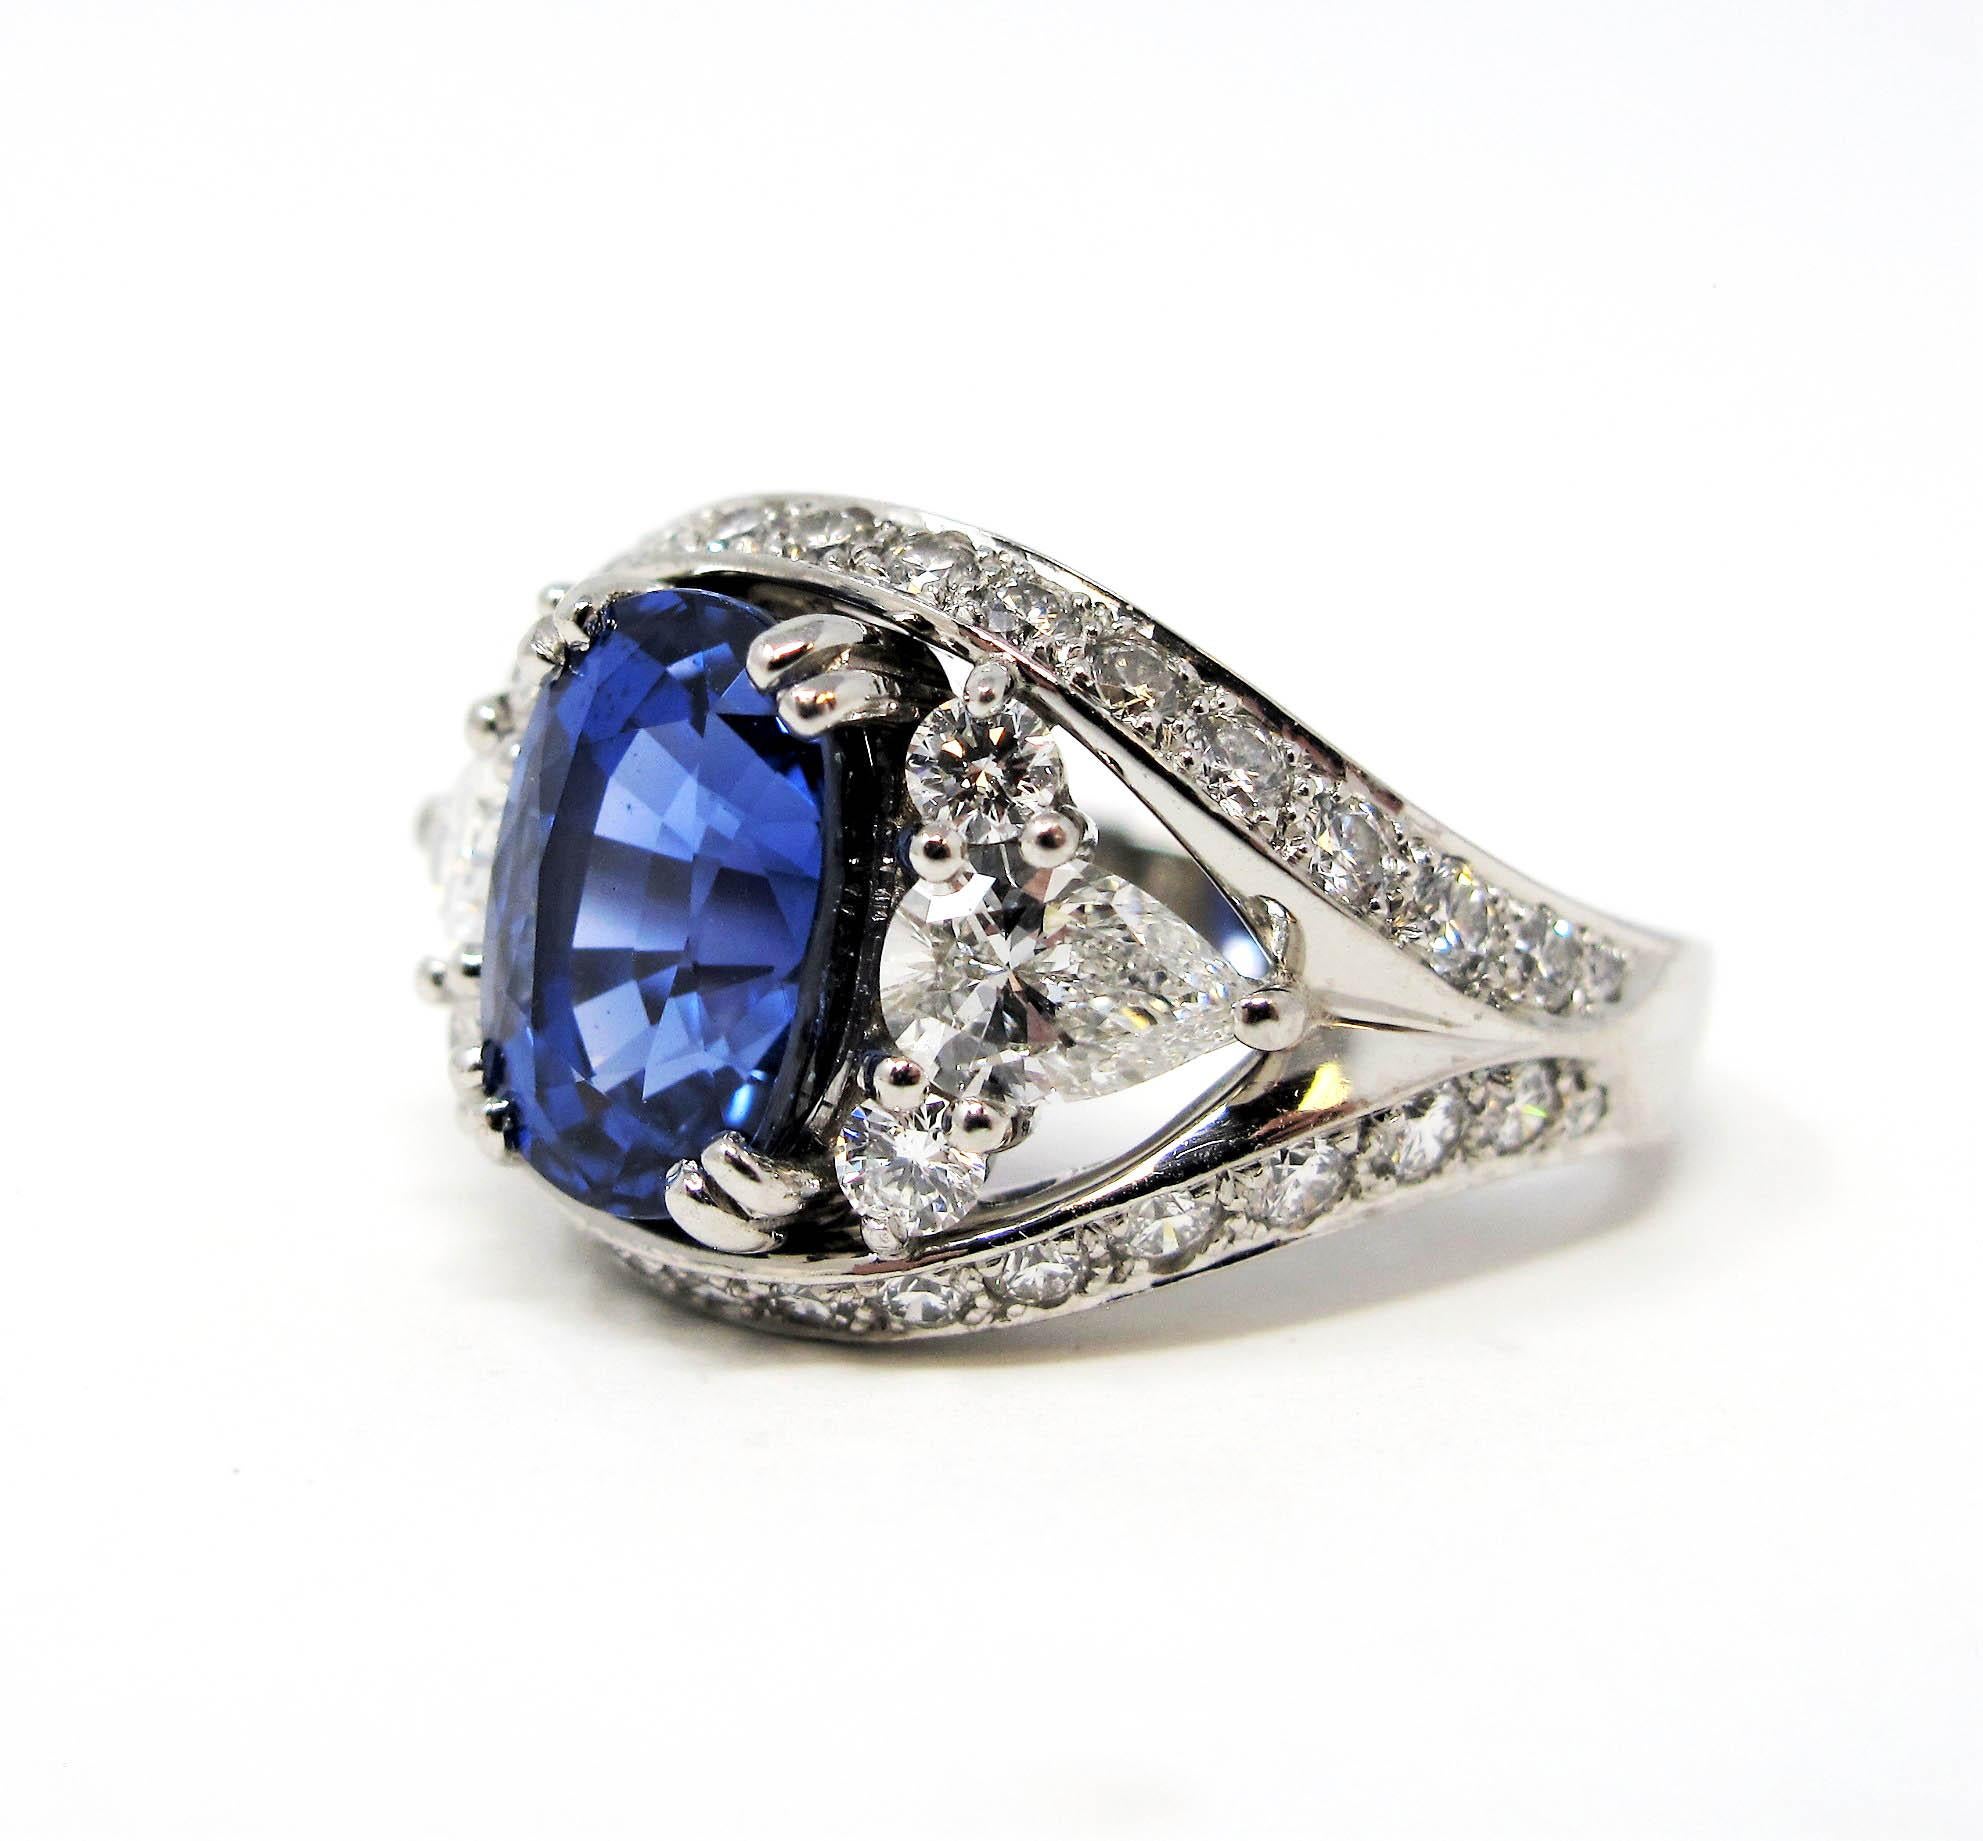 Absolutely breathtaking sapphire and diamond ring. The brilliant blue stone against the bright white diamonds really catches the viewers eye. Exquisite detail work combined with the incredible, untreated sapphire stone, makes this ring a true